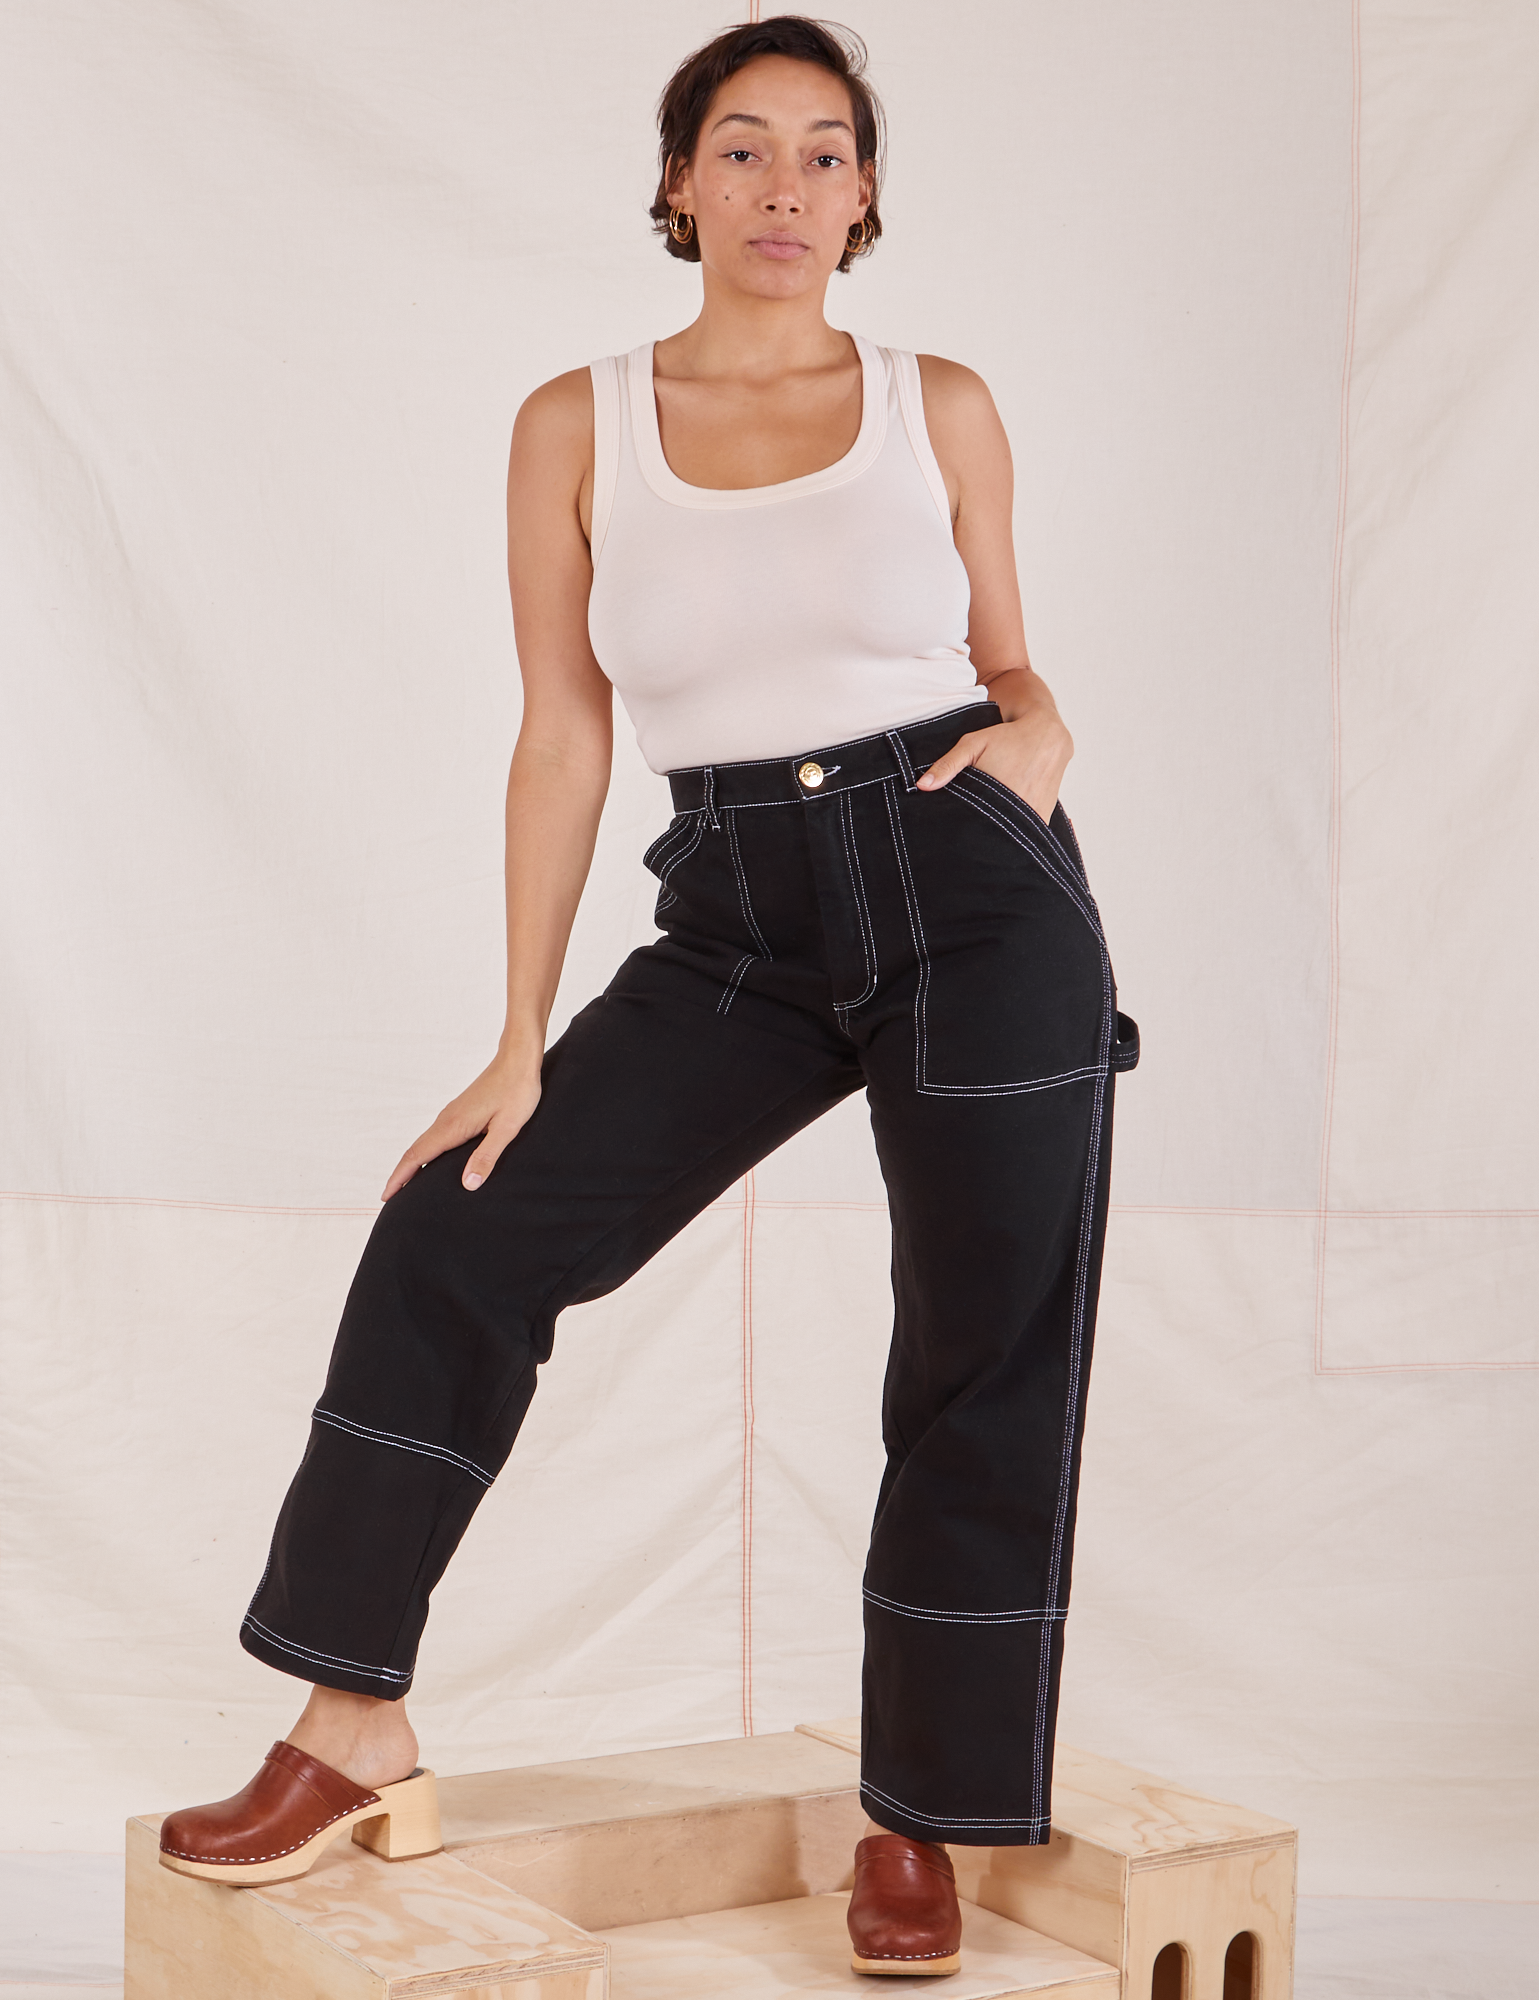 Tiara is 5&#39;4&quot; and wearing S Carpenter Jeans in Black paired with Tank Top in vintage tee off-white